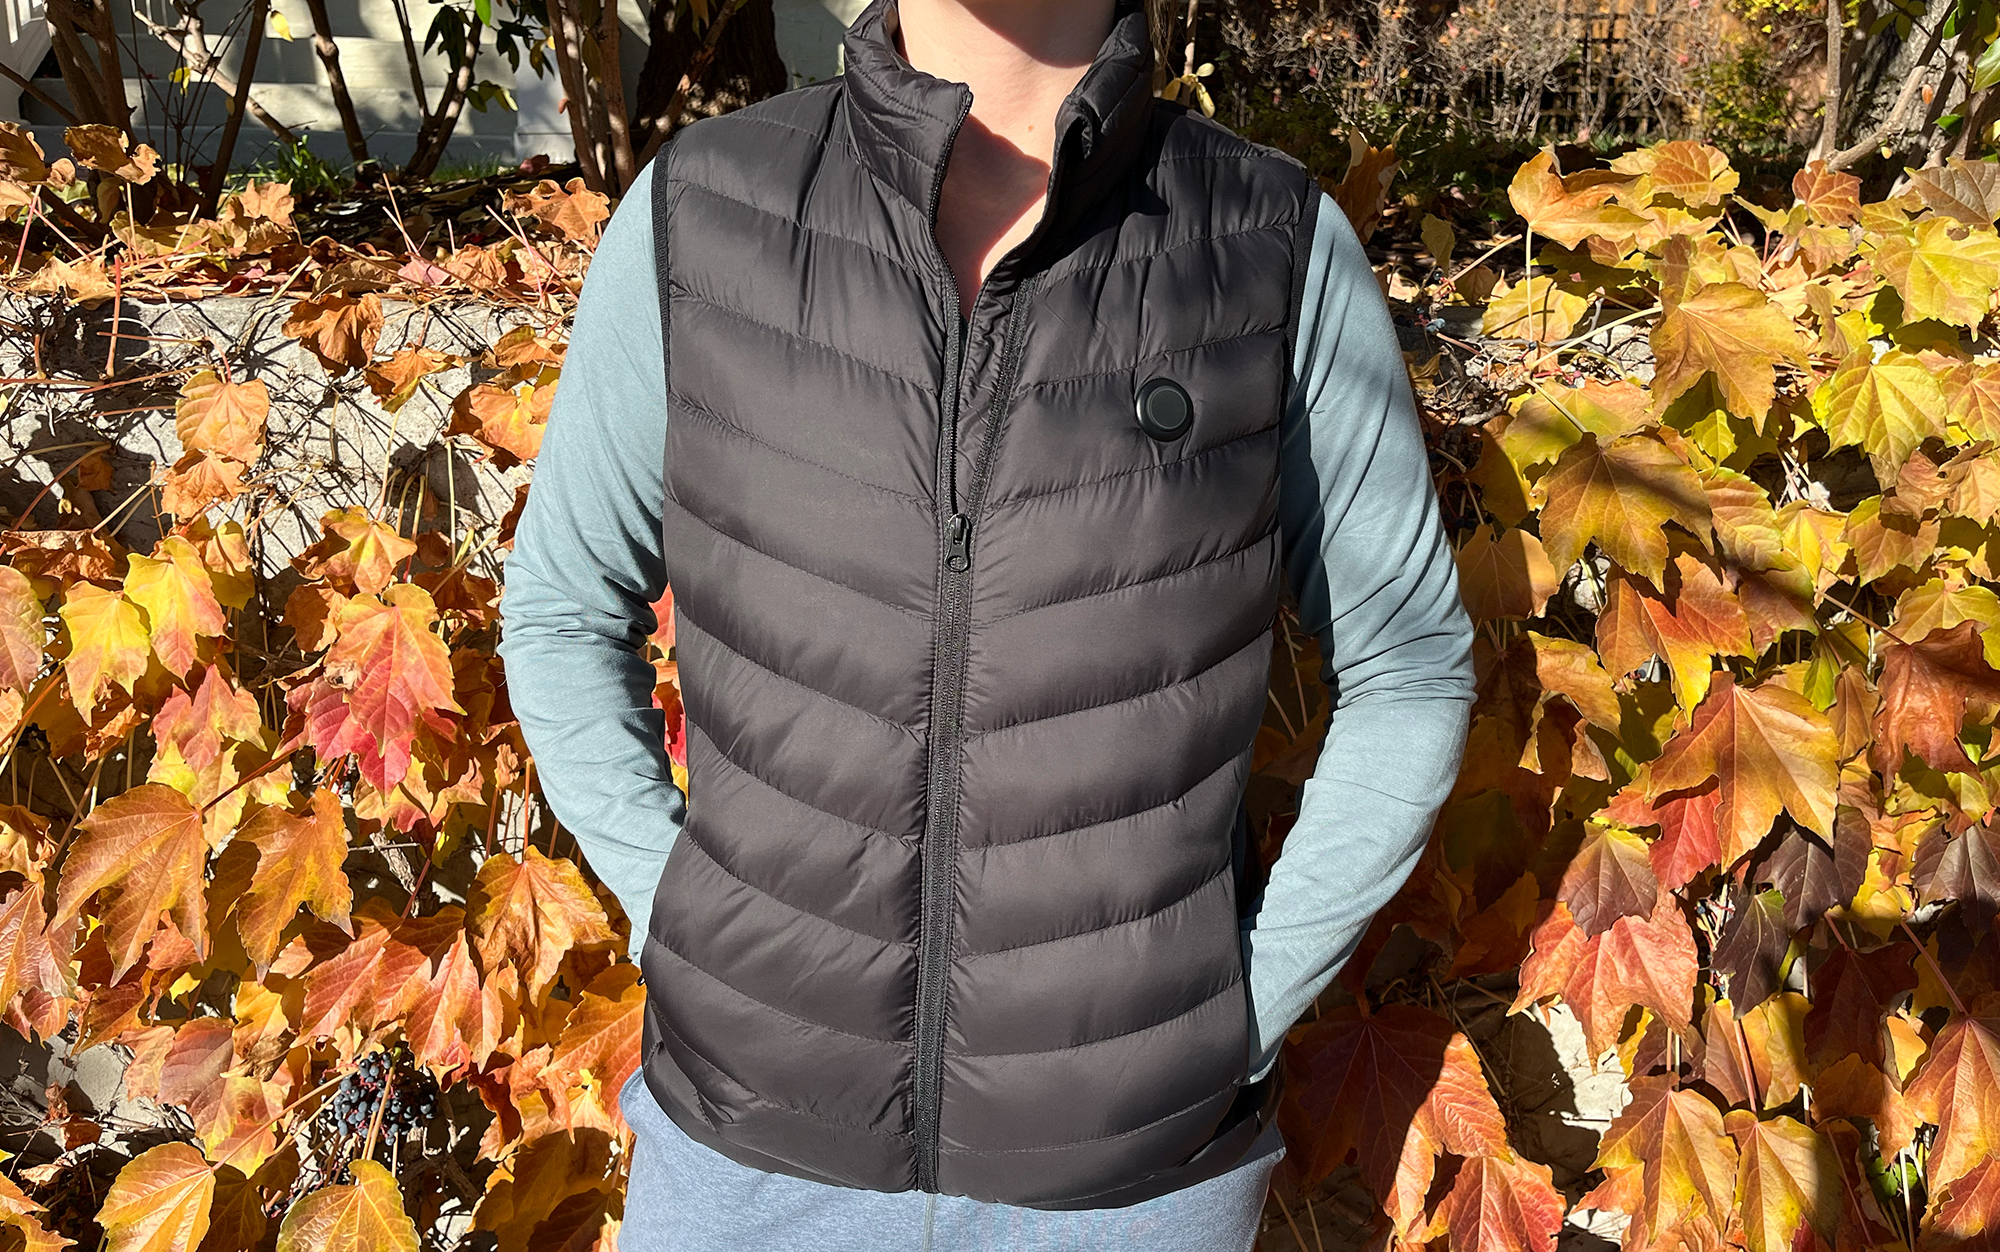 We tested the Weston Heated Vest (Upgraded).